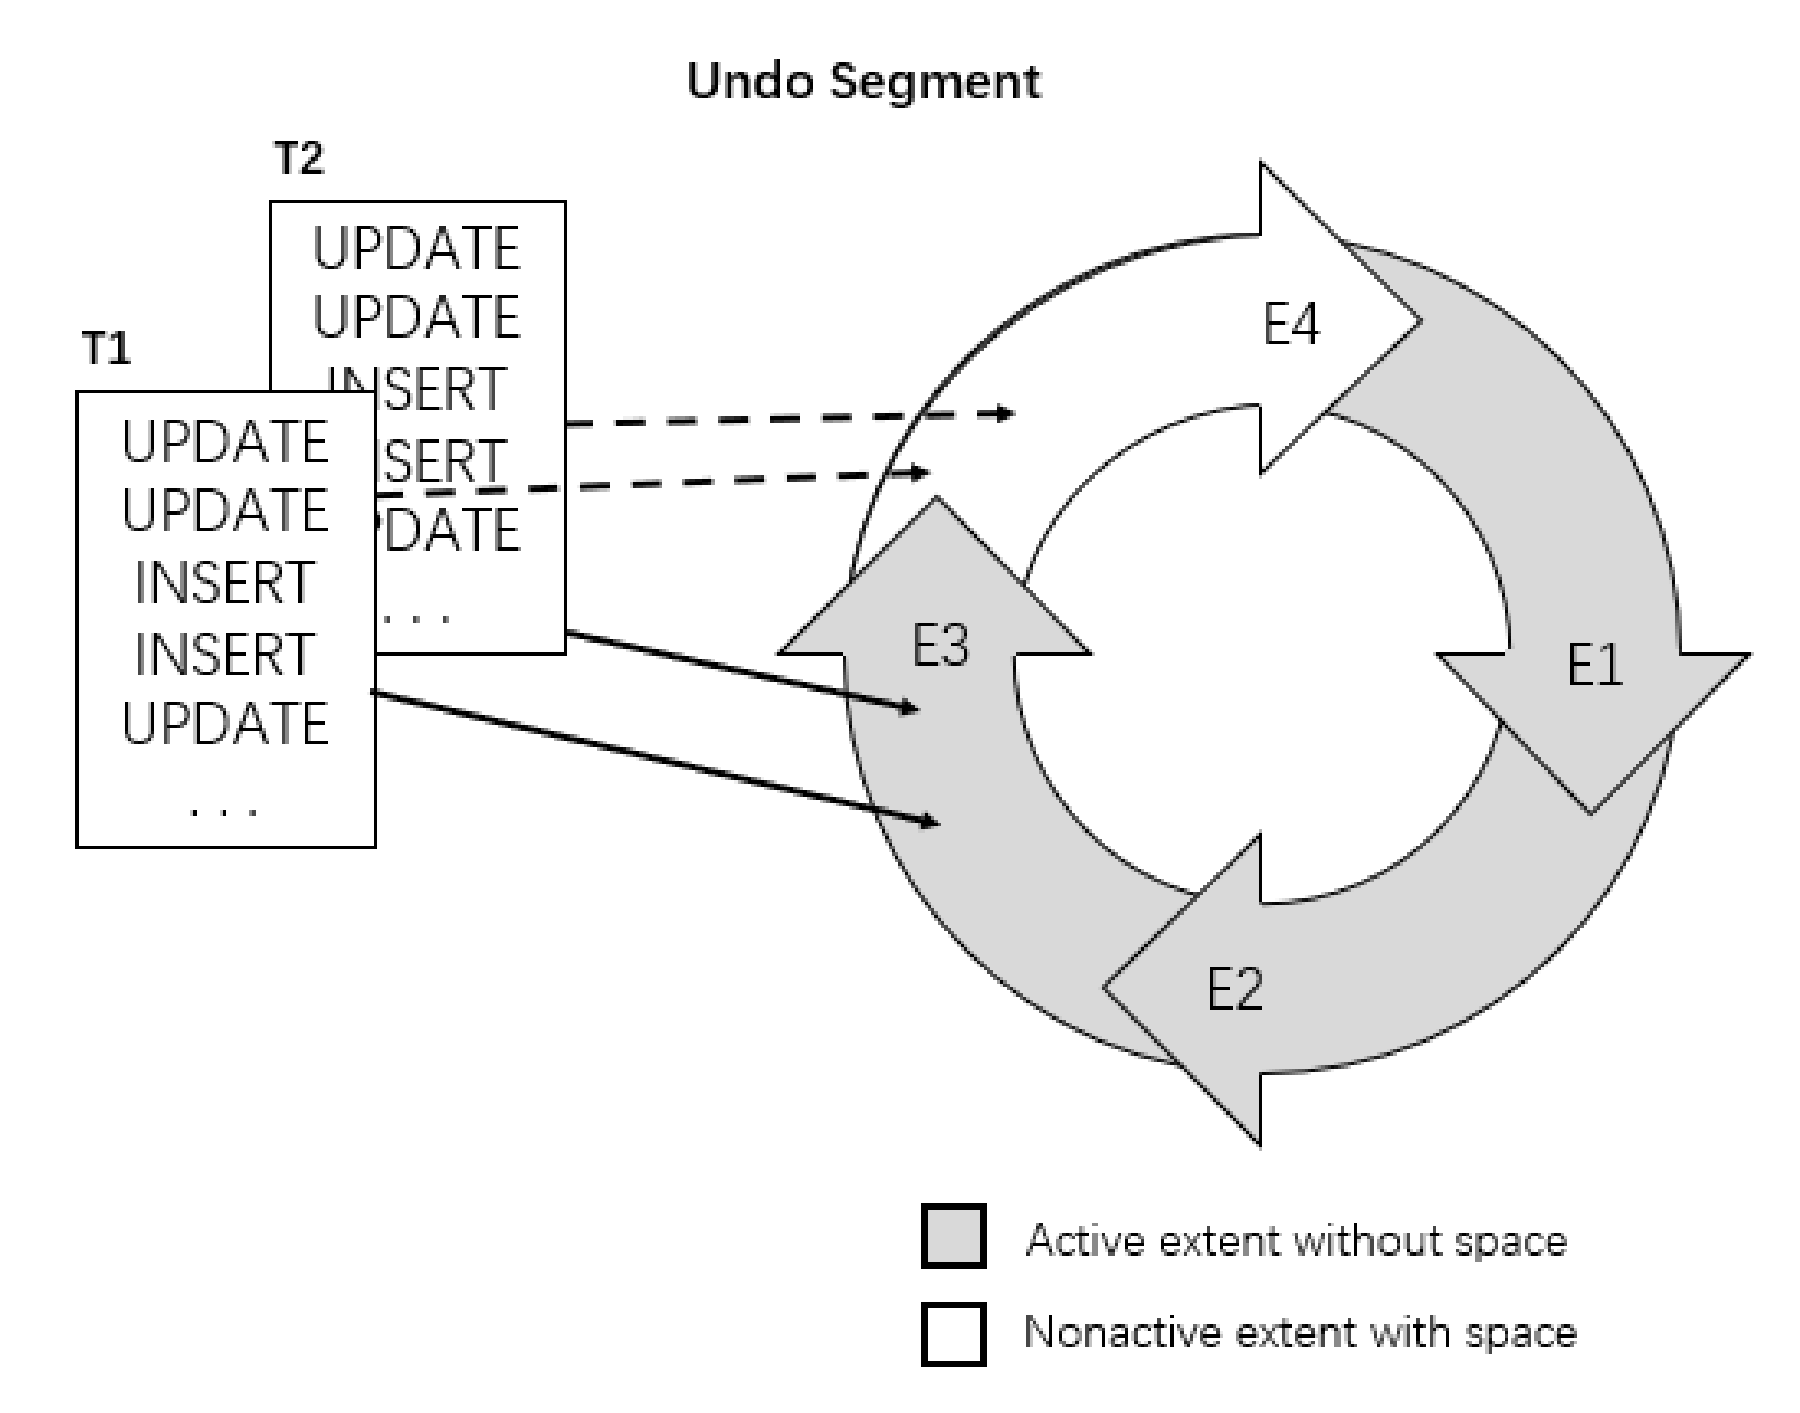 Figure 1 Ring of Allocated Extents in an Undo Segment